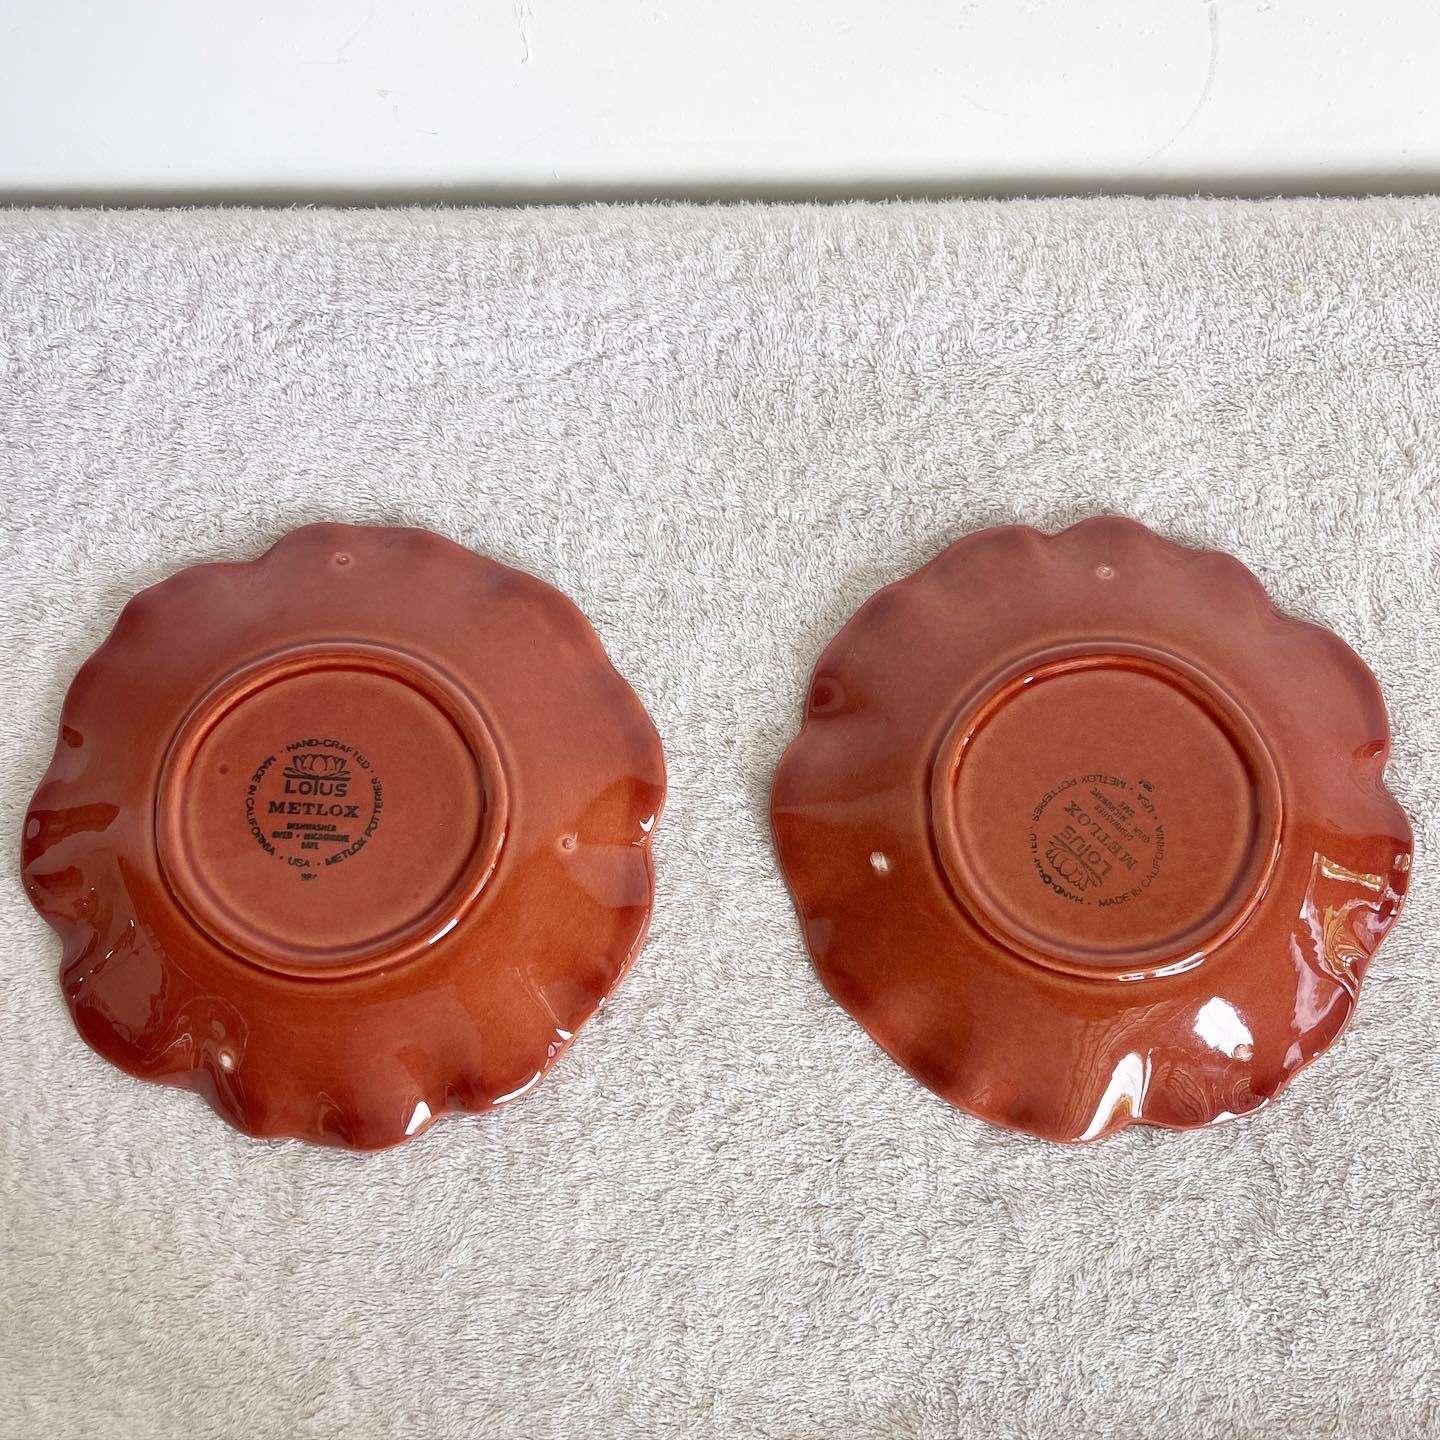 Add a pop of color to your table with this exceptional pair of vintage red Metlox Poppytrail Lotus plates. Perfect for showcasing your culinary creations.

Exceptional pair of vintage red Metlox Poppytrail Lotus plates
Add a pop of color to your